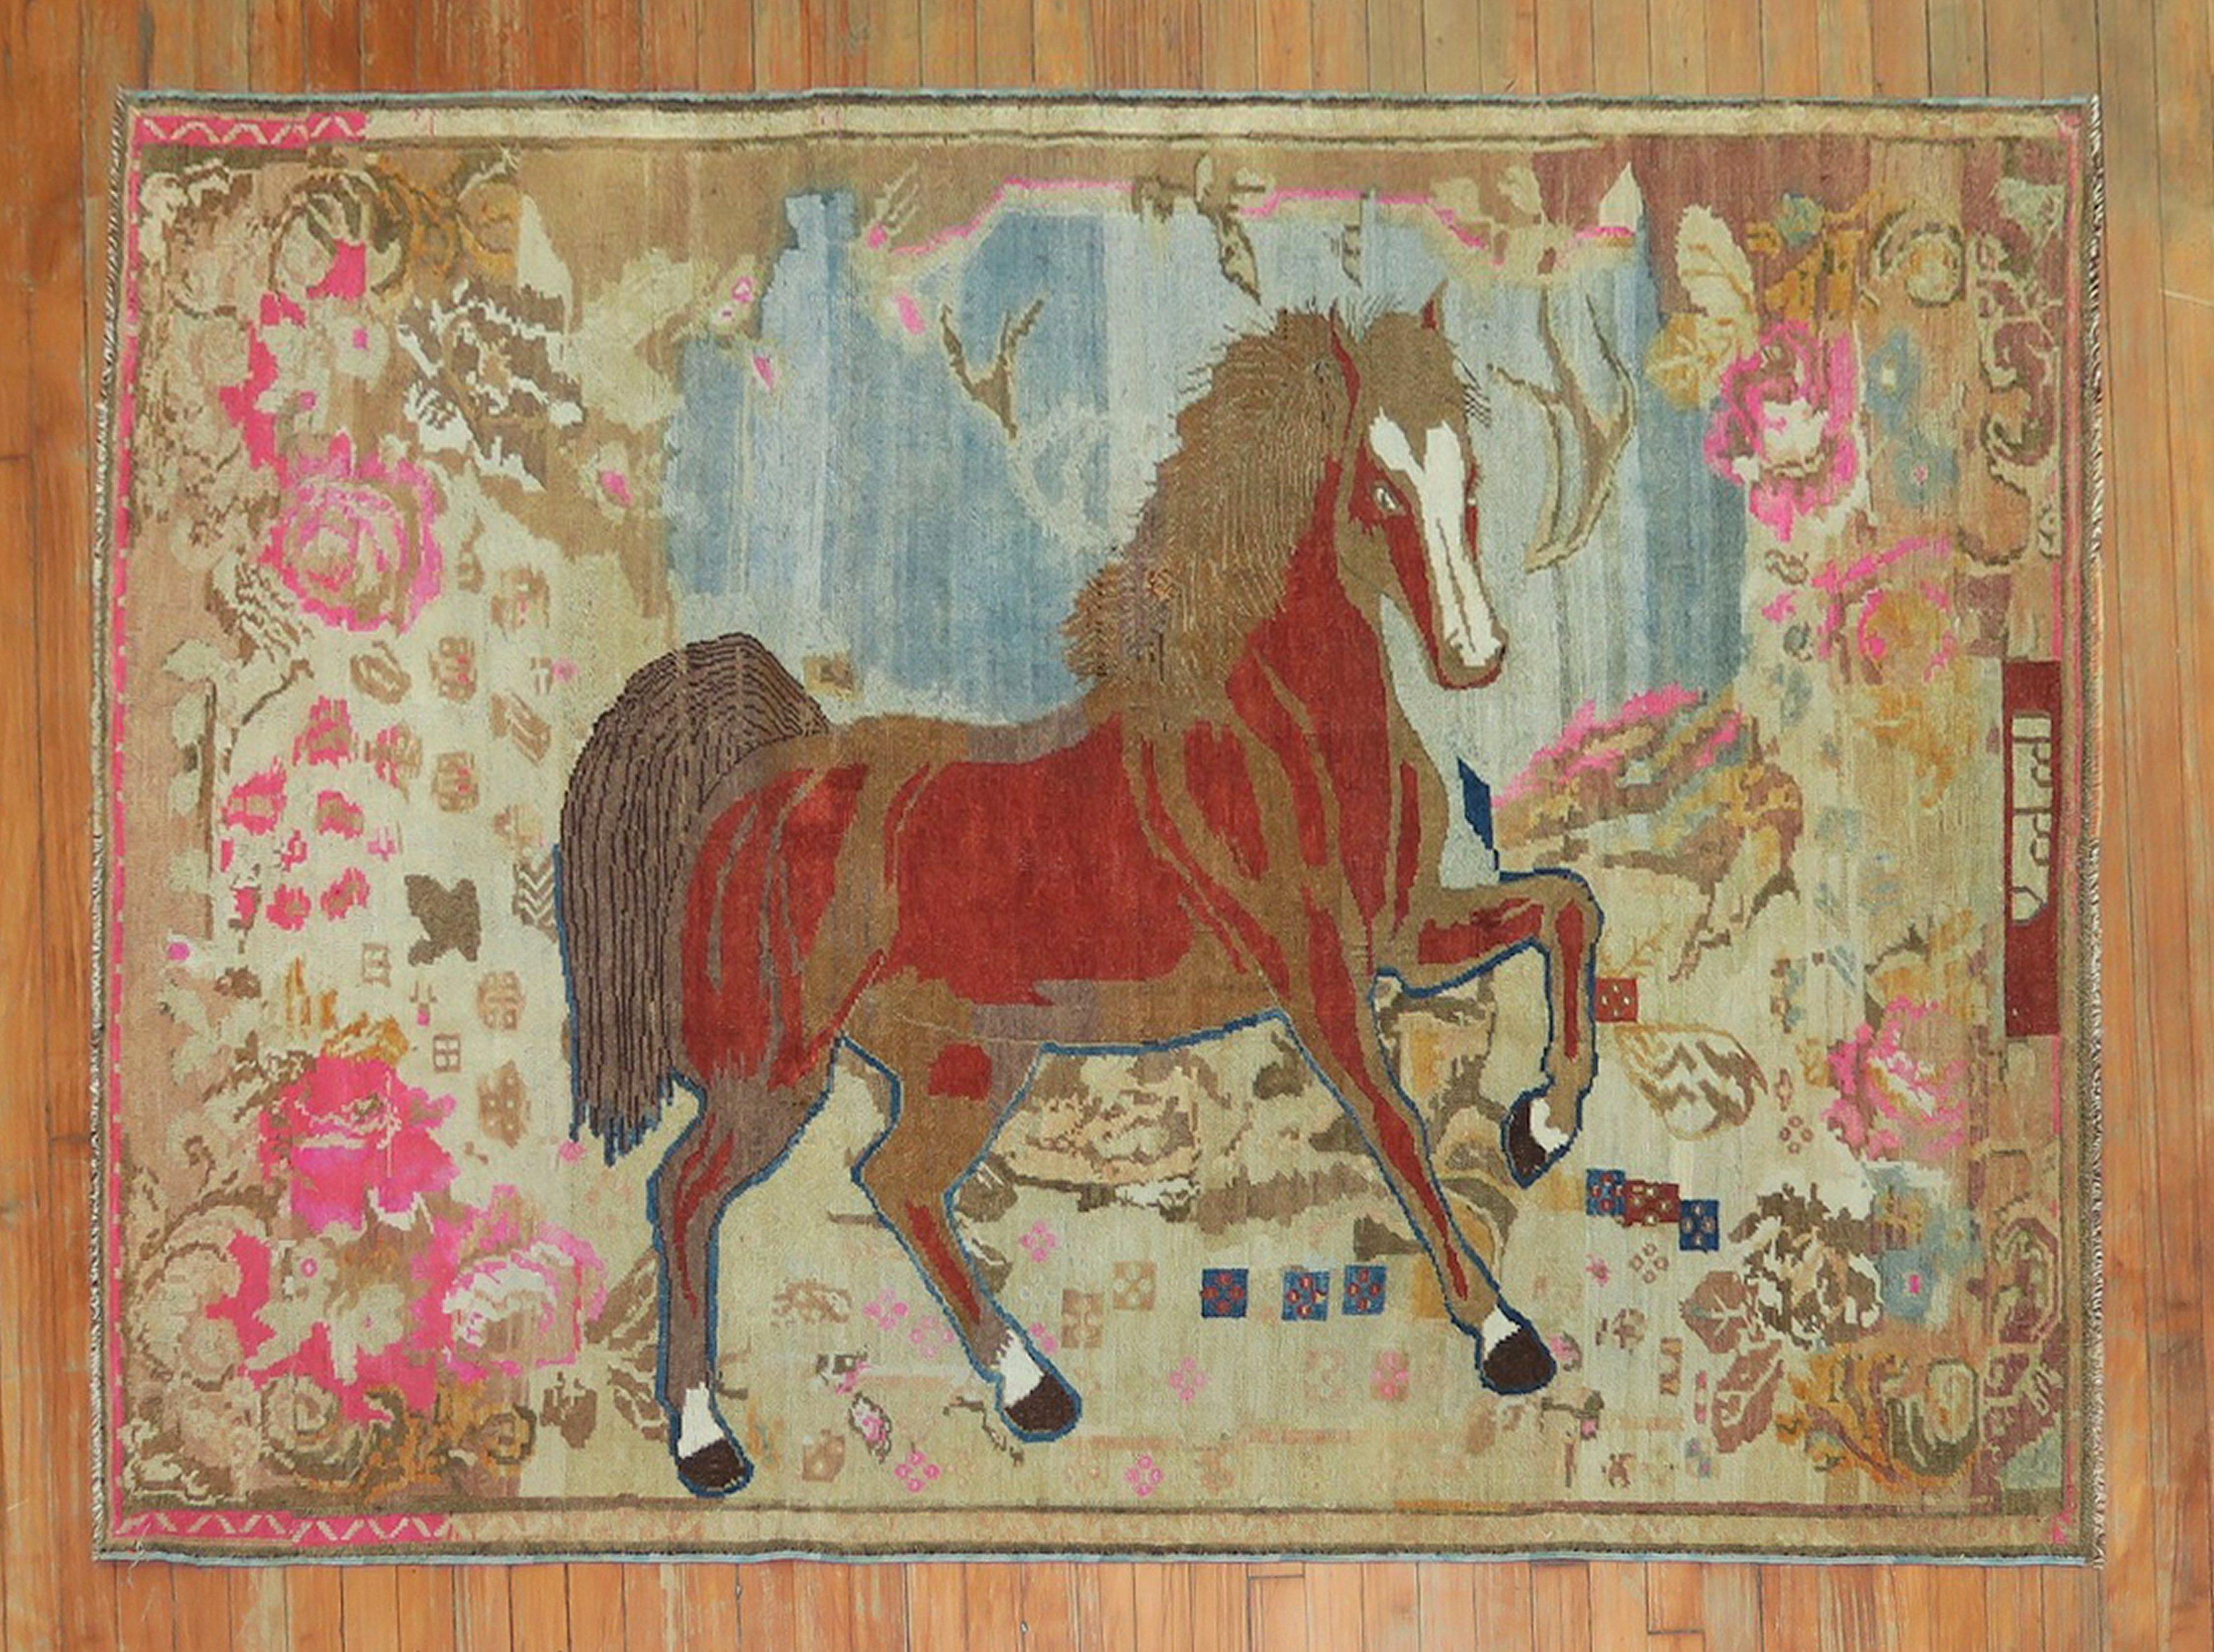 Marvelous one of a kind Pictorial Russian Karabagh rug depicting a large, bold and beautiful horse with a floral scenic background with predominant accent colors in light blue, bright pinks, and brown. The details, texture, wool and colors are